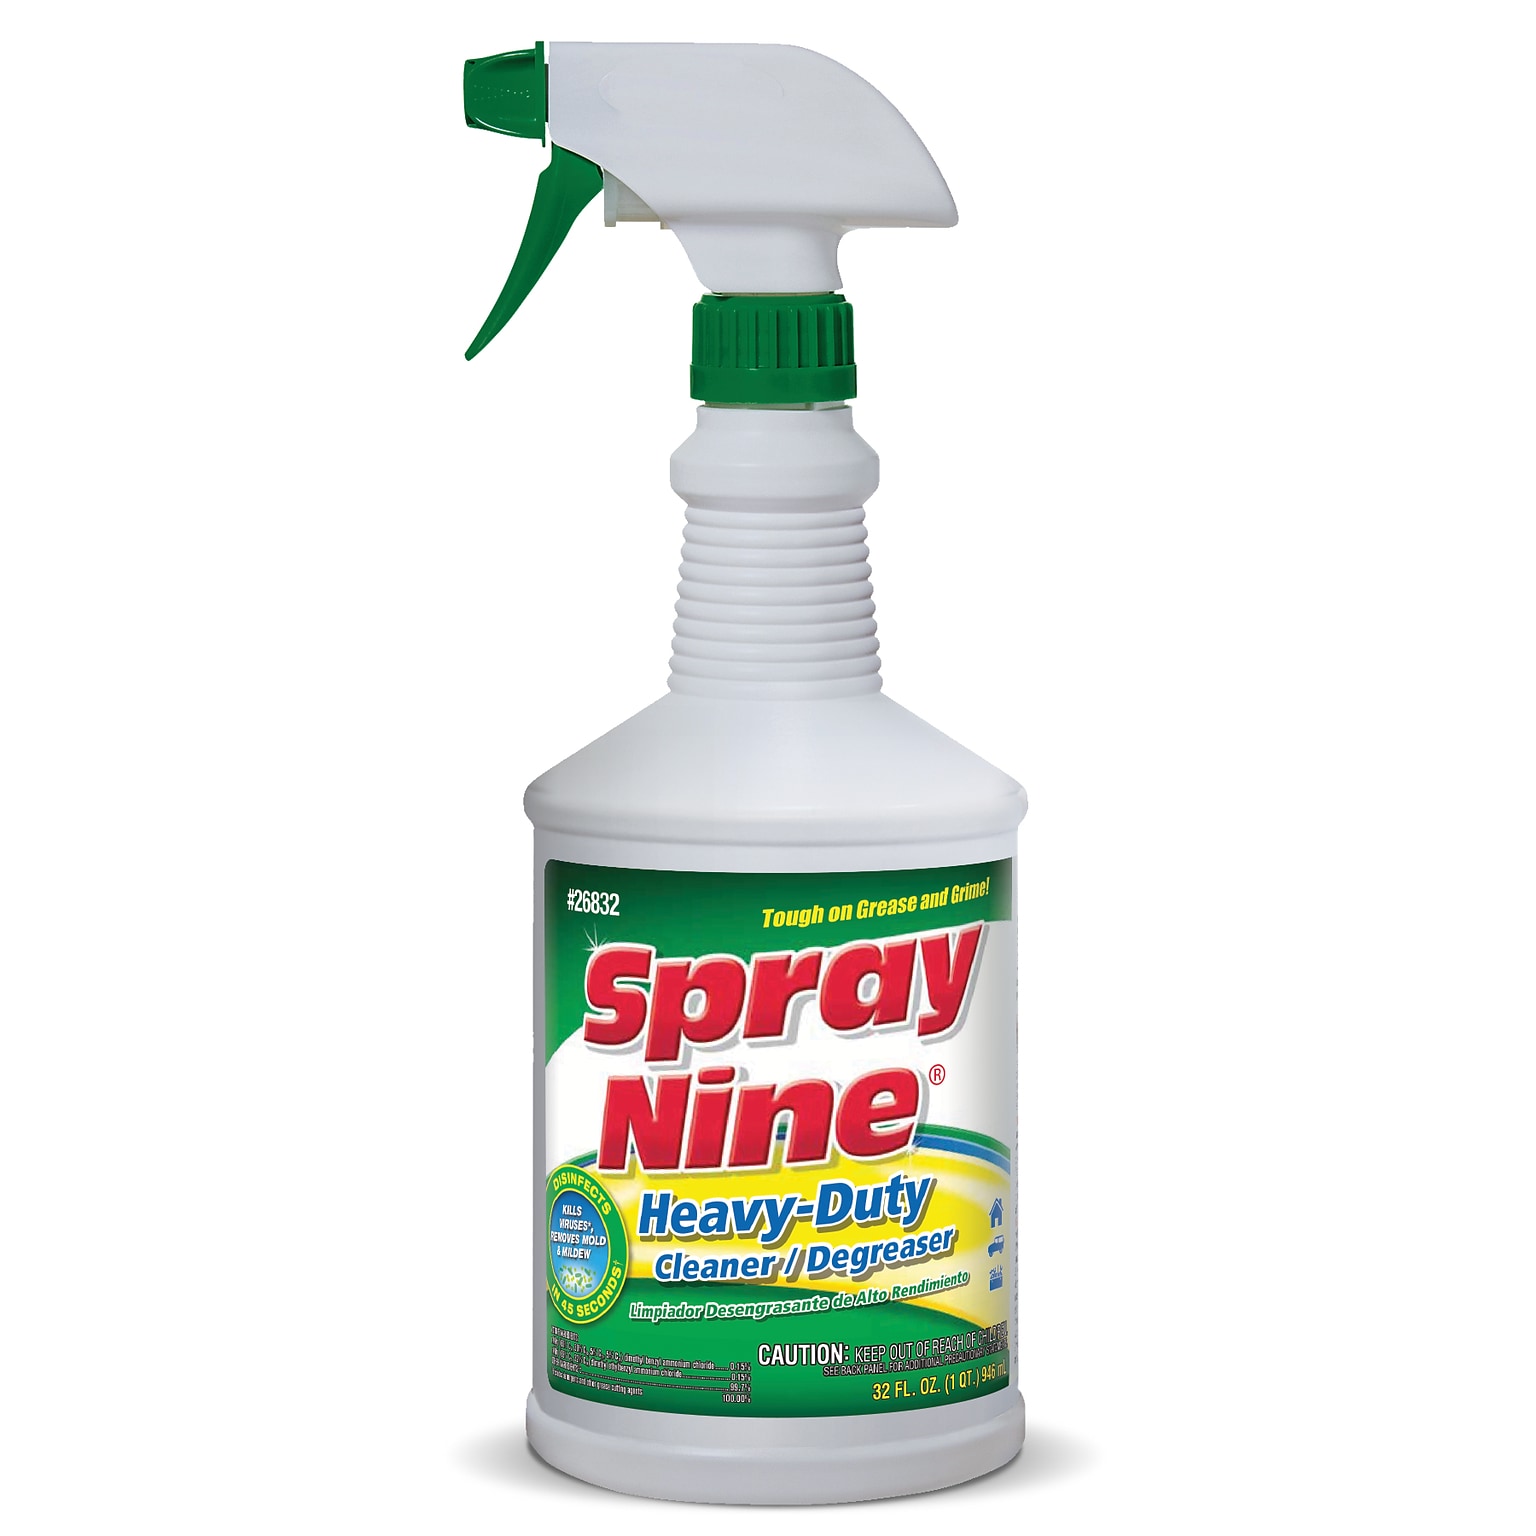 Spray Nine Kitchen & Oven Cleaner Degreaser Disinfectant (ITW26832)